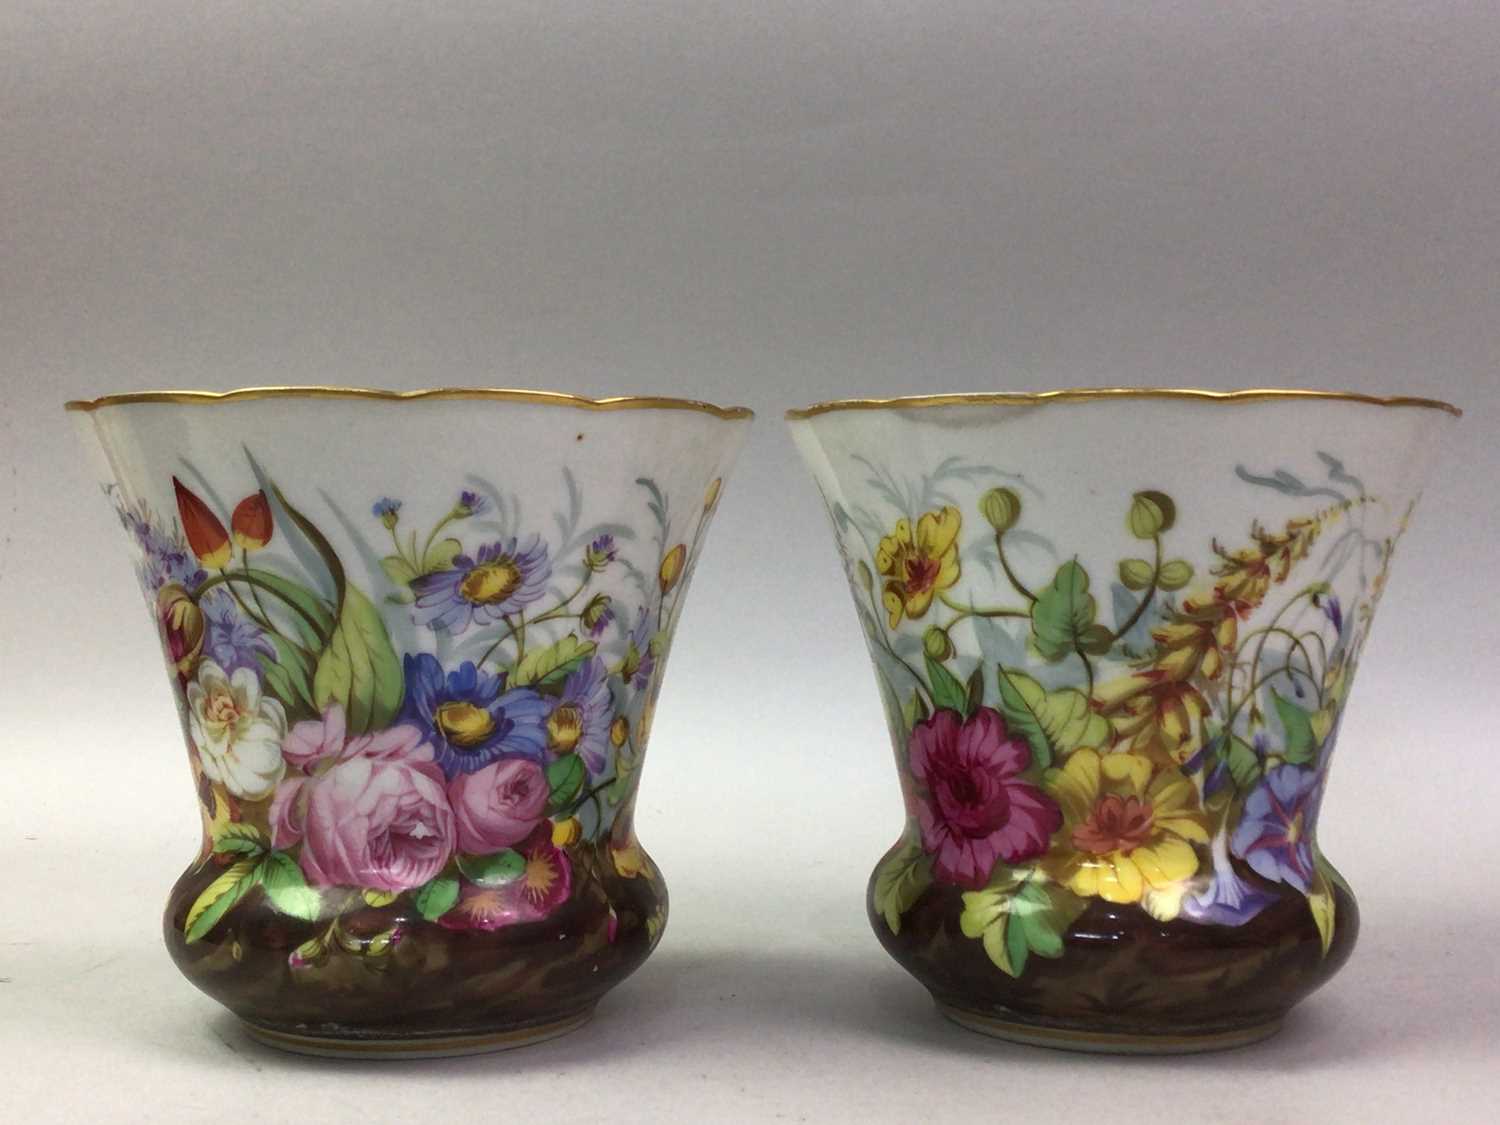 PAIR OF CONTINENTAL PORCELAIN PLANTERS, LATE 19TH CENTURY - Image 2 of 3